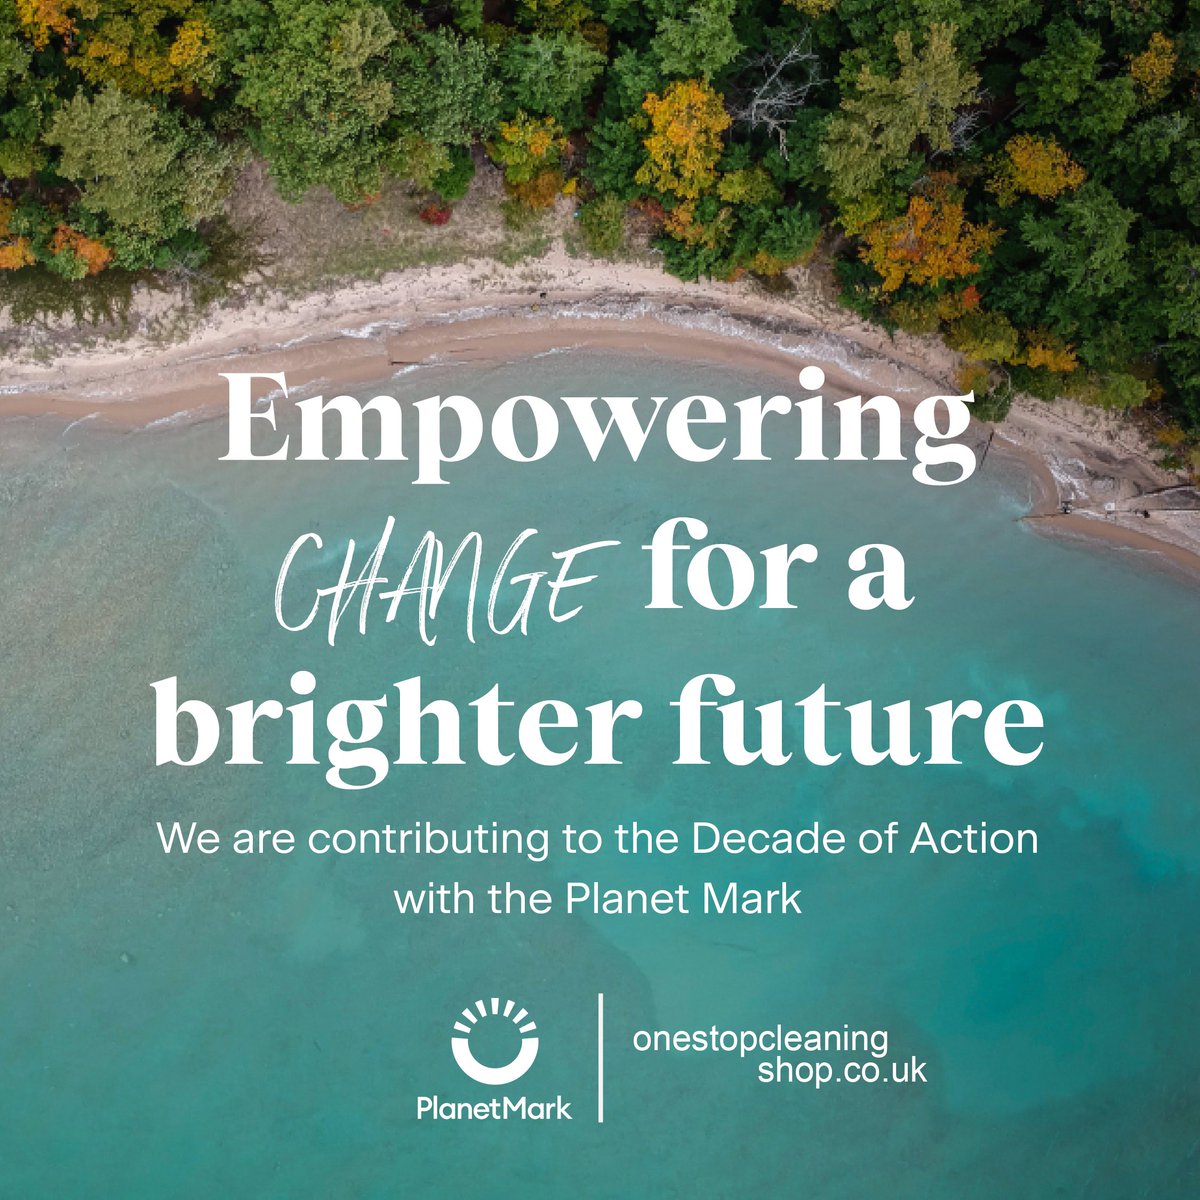 I'm proud to announce that One Stop Cleaning Shop has achieved @ThePlanetMark  Year 2 Business Certification. 💙🌍

#cleaning #business #sustainability #carbonfootprint #carbonreduction #coolearth #climatecrisis #businesssustainability #brighterfuture #planetmark #decadeofaction